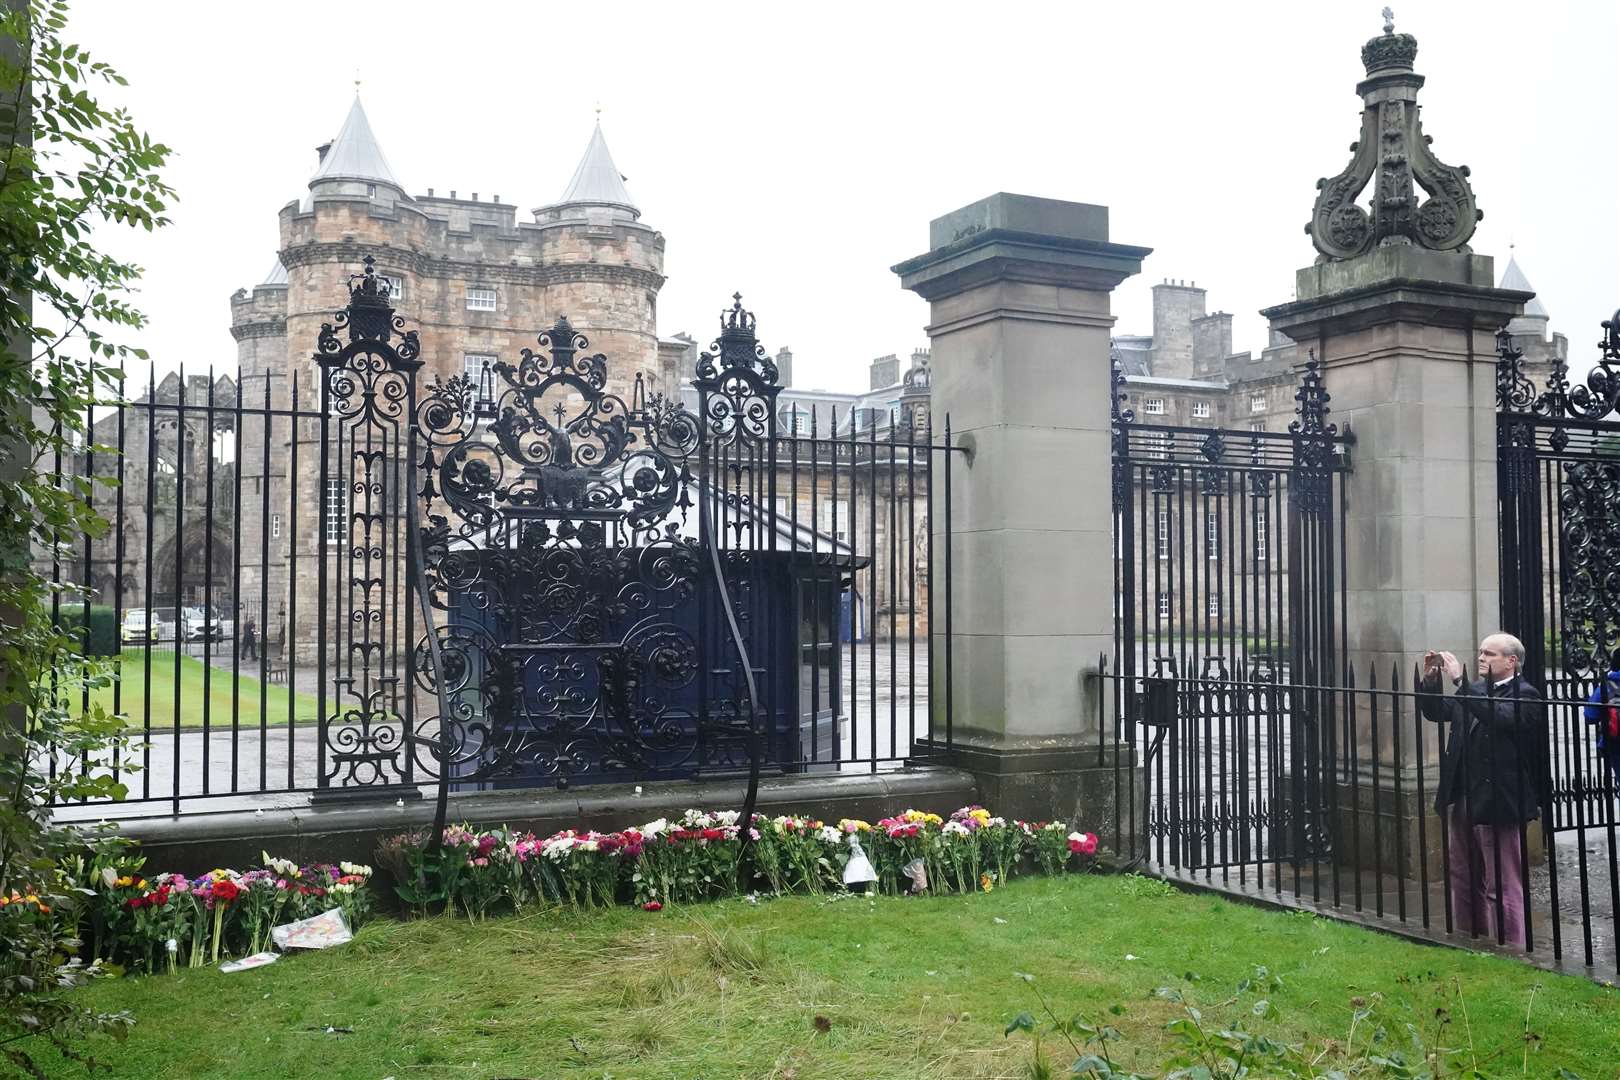 Floral tributes outside the Palace of Holyroodhouse in Edinburgh (Jane Barlow/PA)